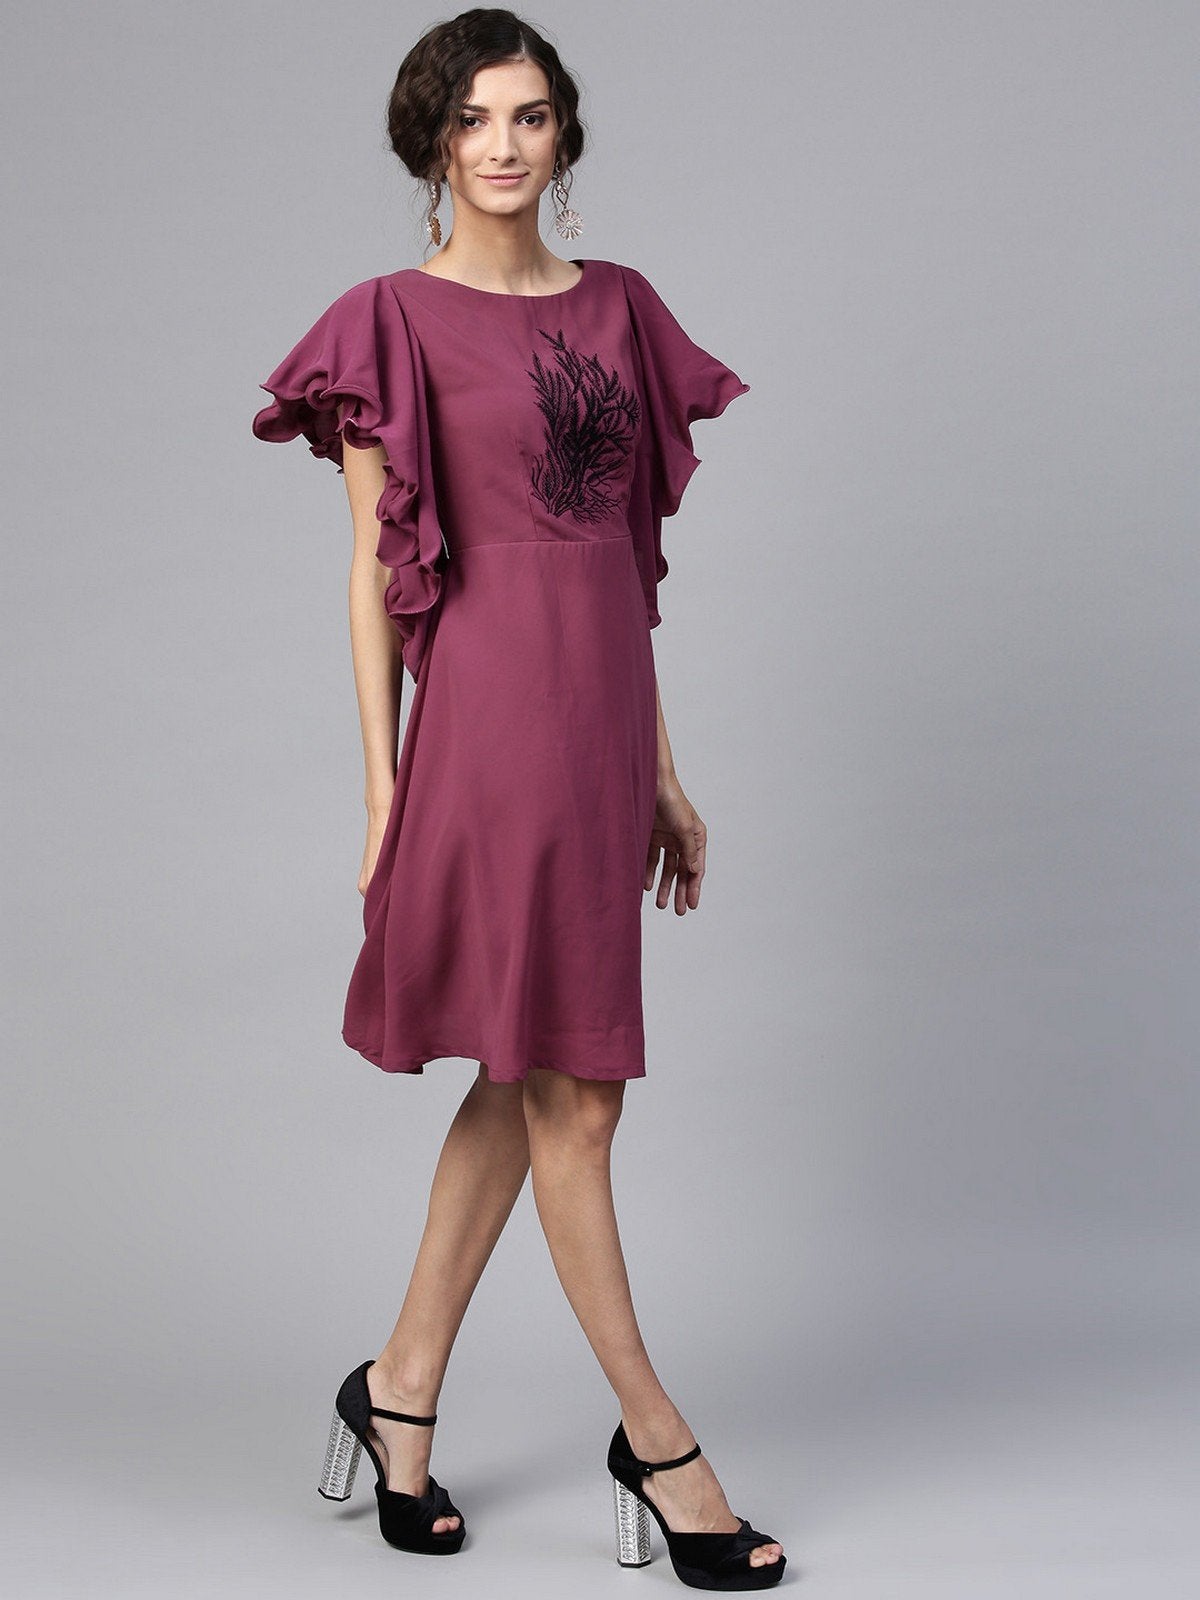 Women's Embroidered Frill And Flare Dress - Pannkh